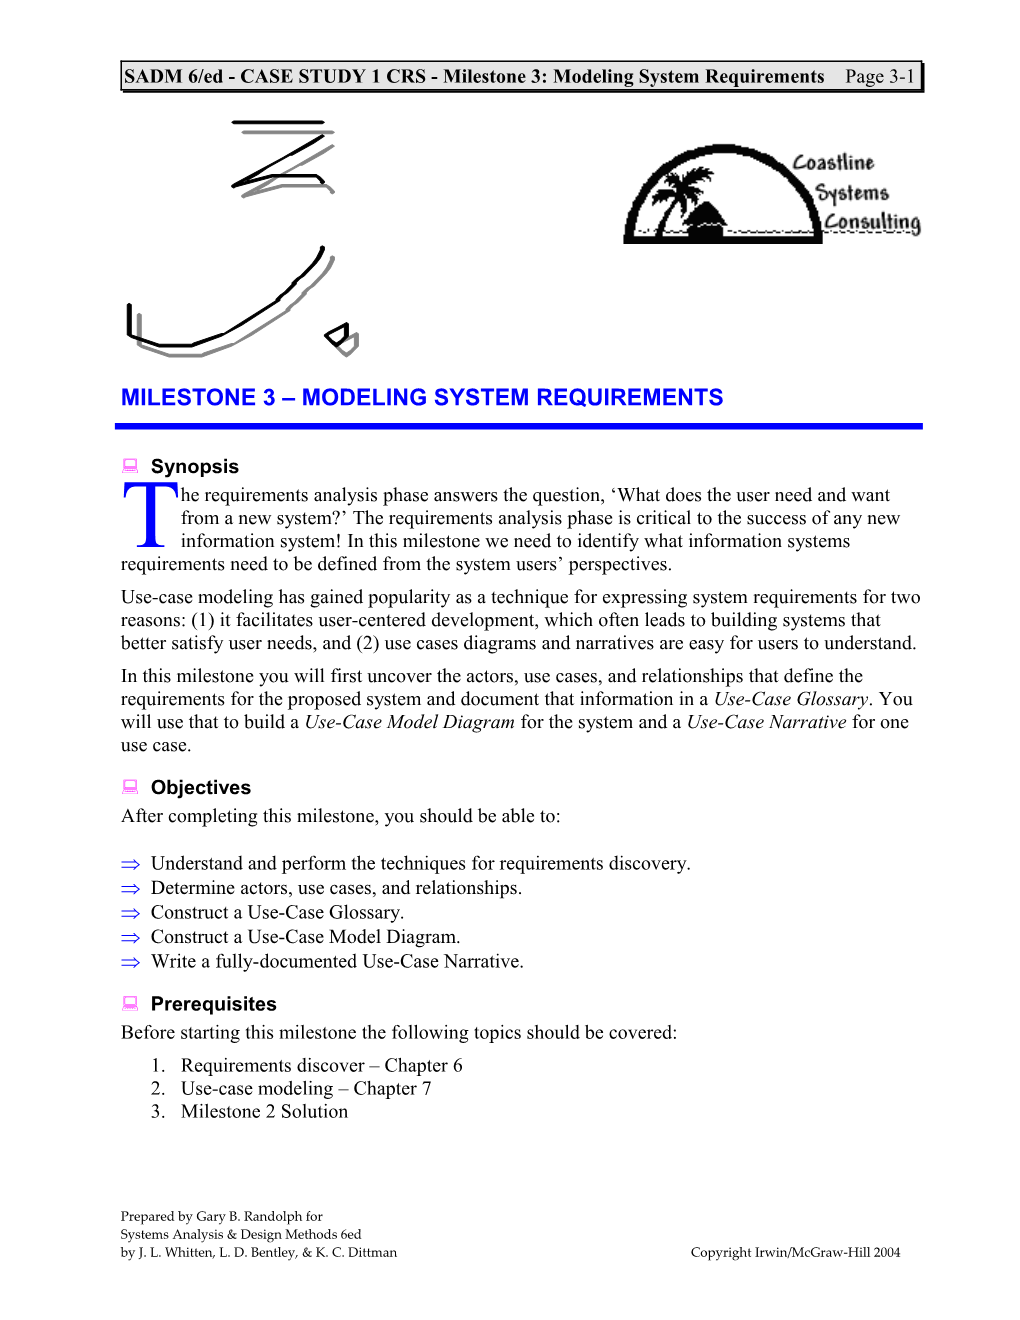 SADM 6/Ed - CASE STUDY 1 CRS - Milestone 3: Modeling System Requirements Page 3-1